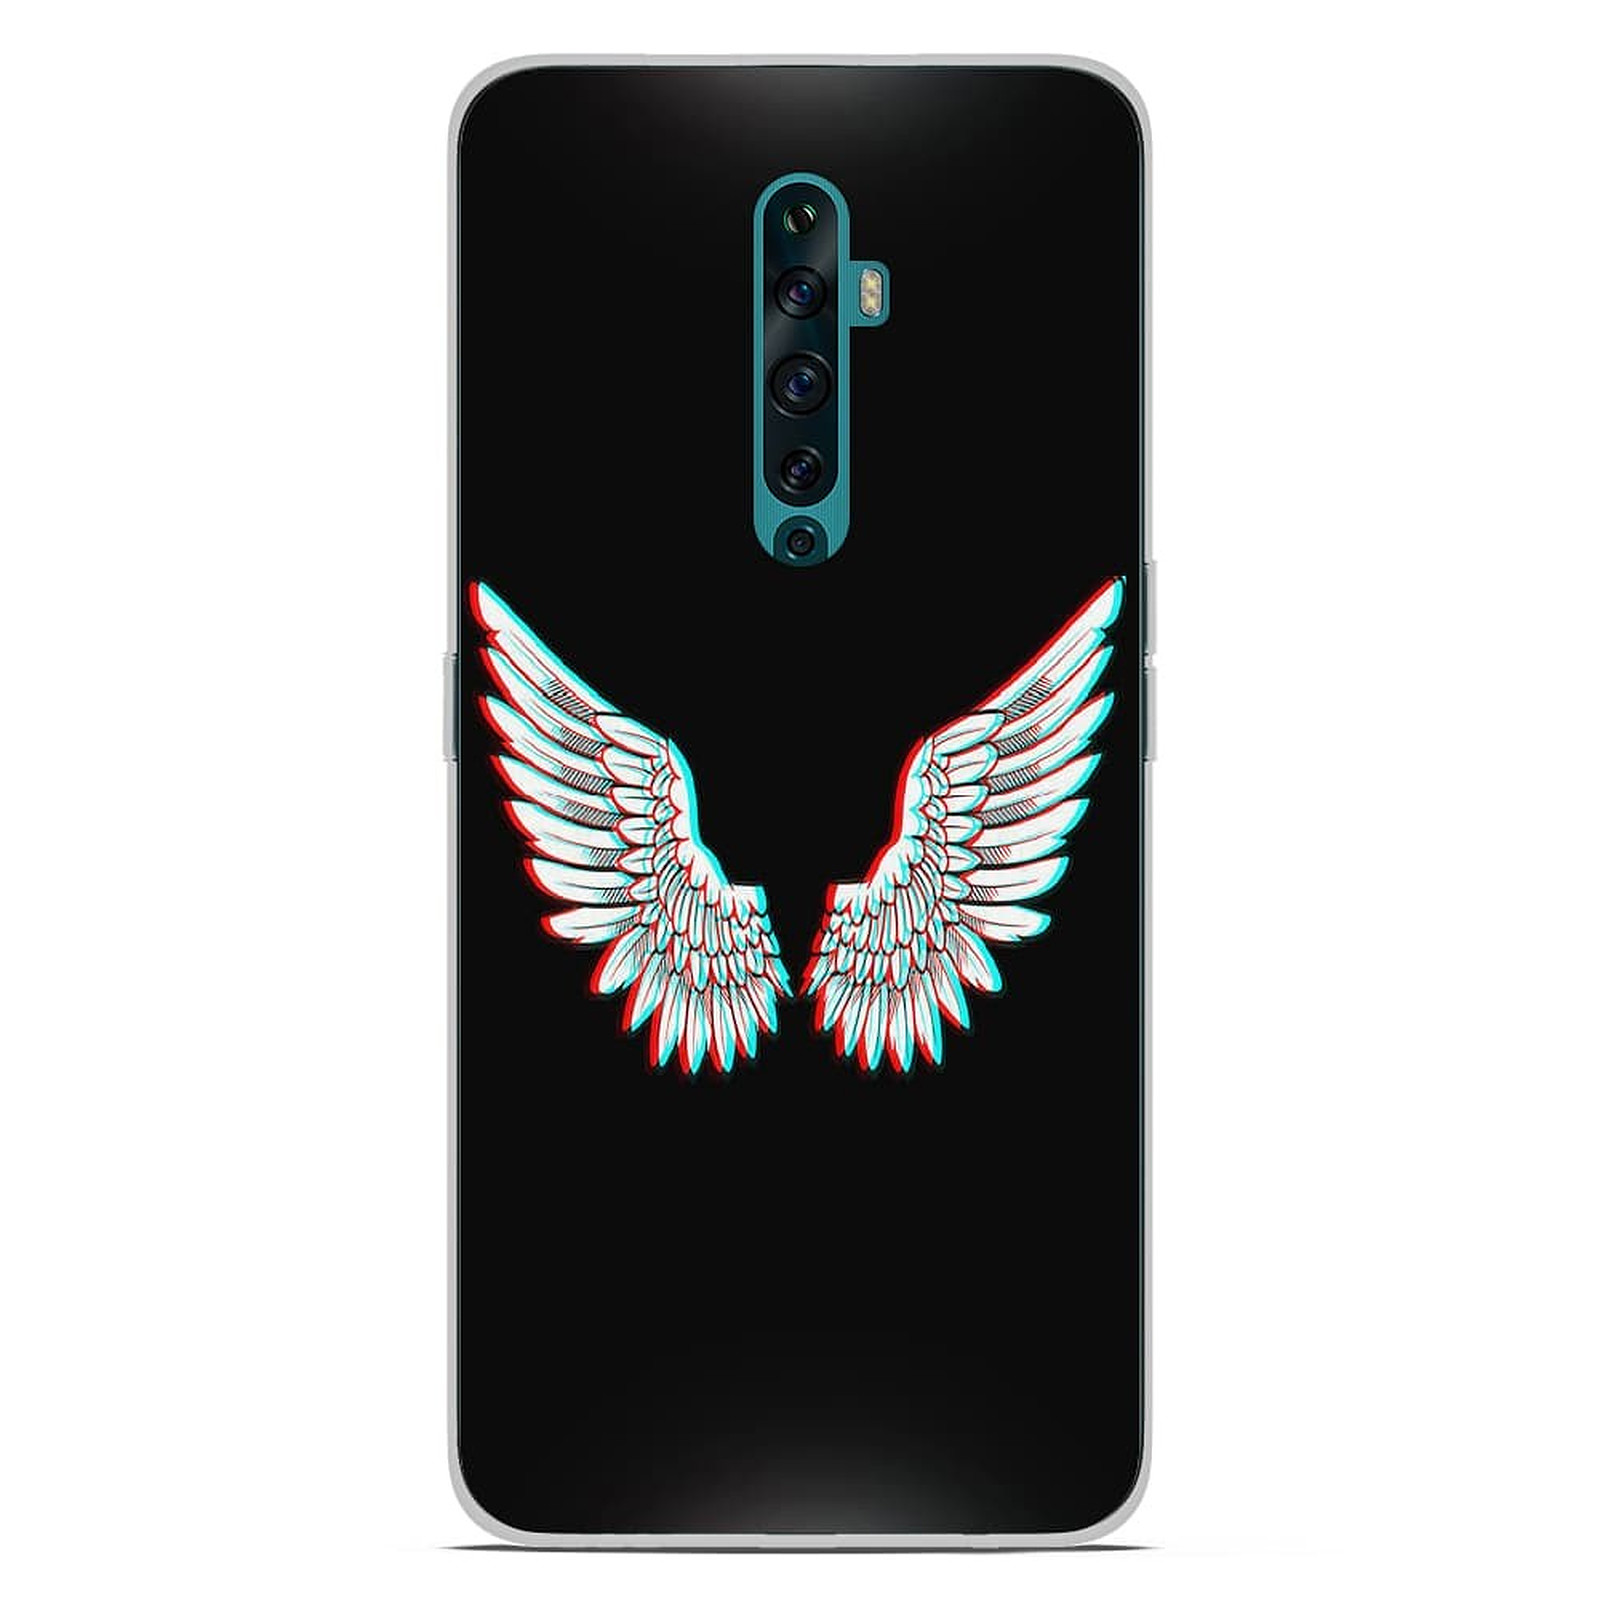 1001 Coques Coque silicone gel Oppo Reno 2Z motif Ailes d'Ange - Coque telephone 1001Coques